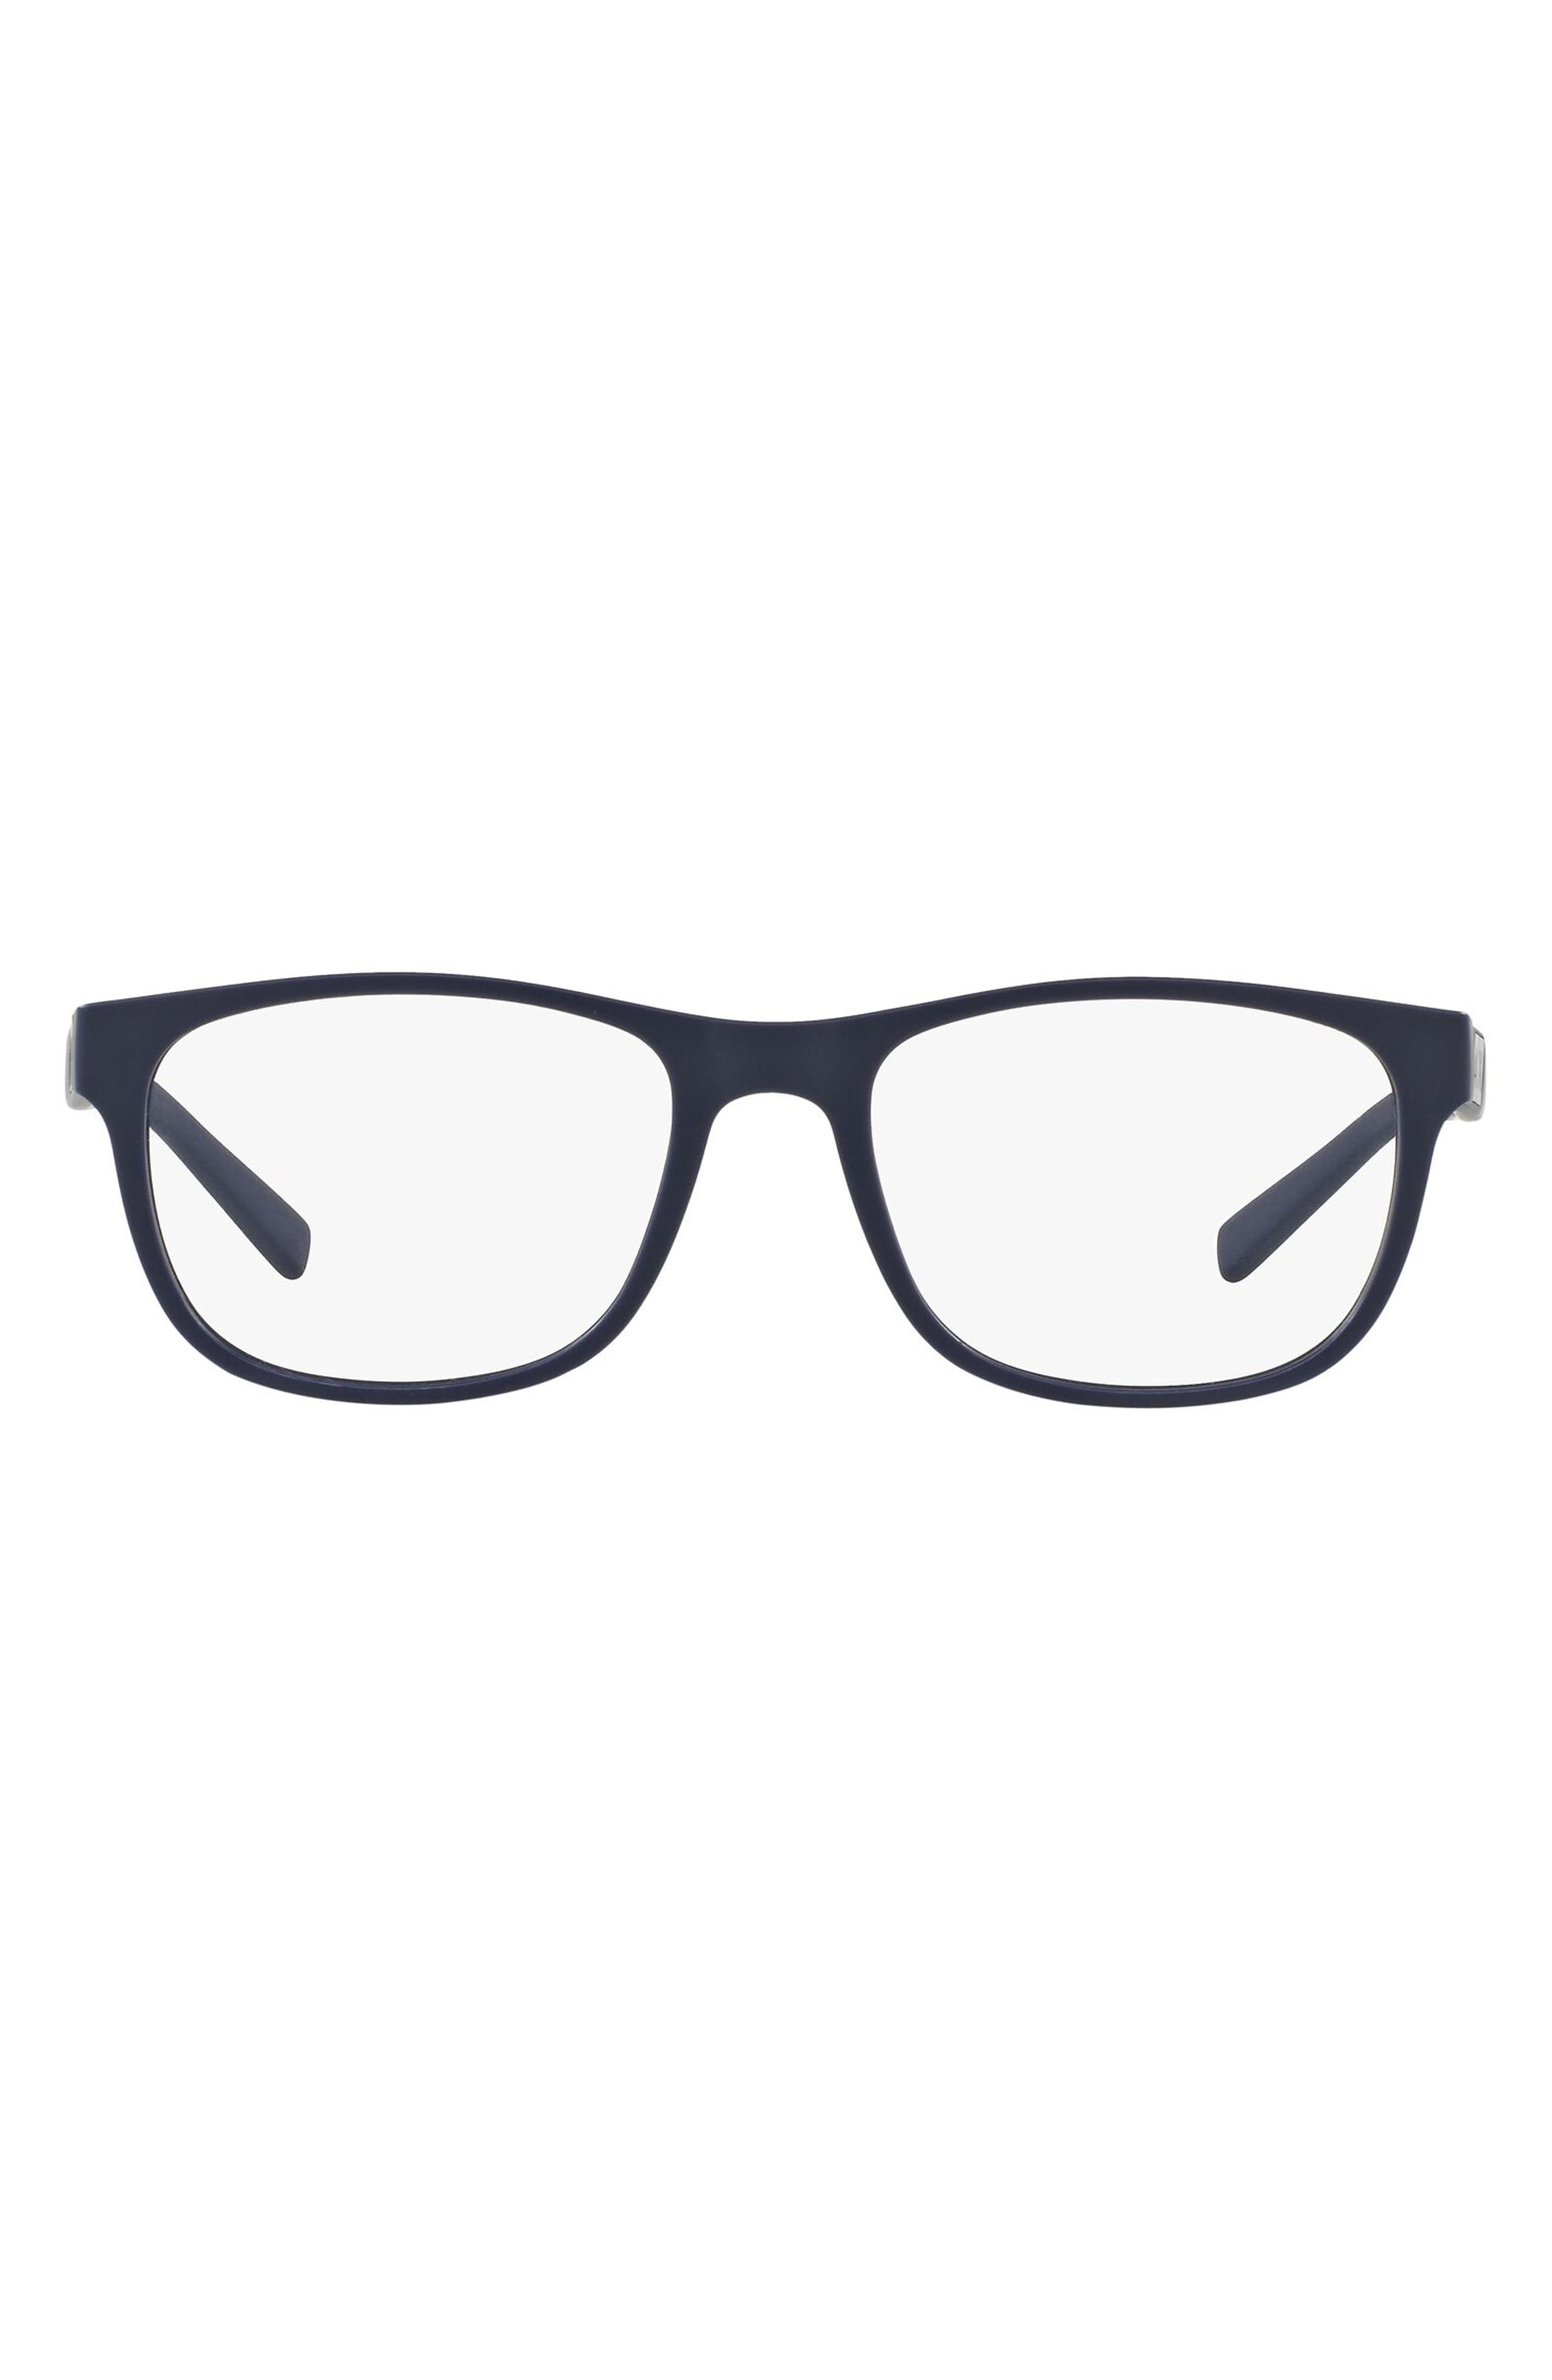 EAN 8053672571936 product image for Men's Ax Armani Exchange 54mm Reading Glasses - Navy | upcitemdb.com